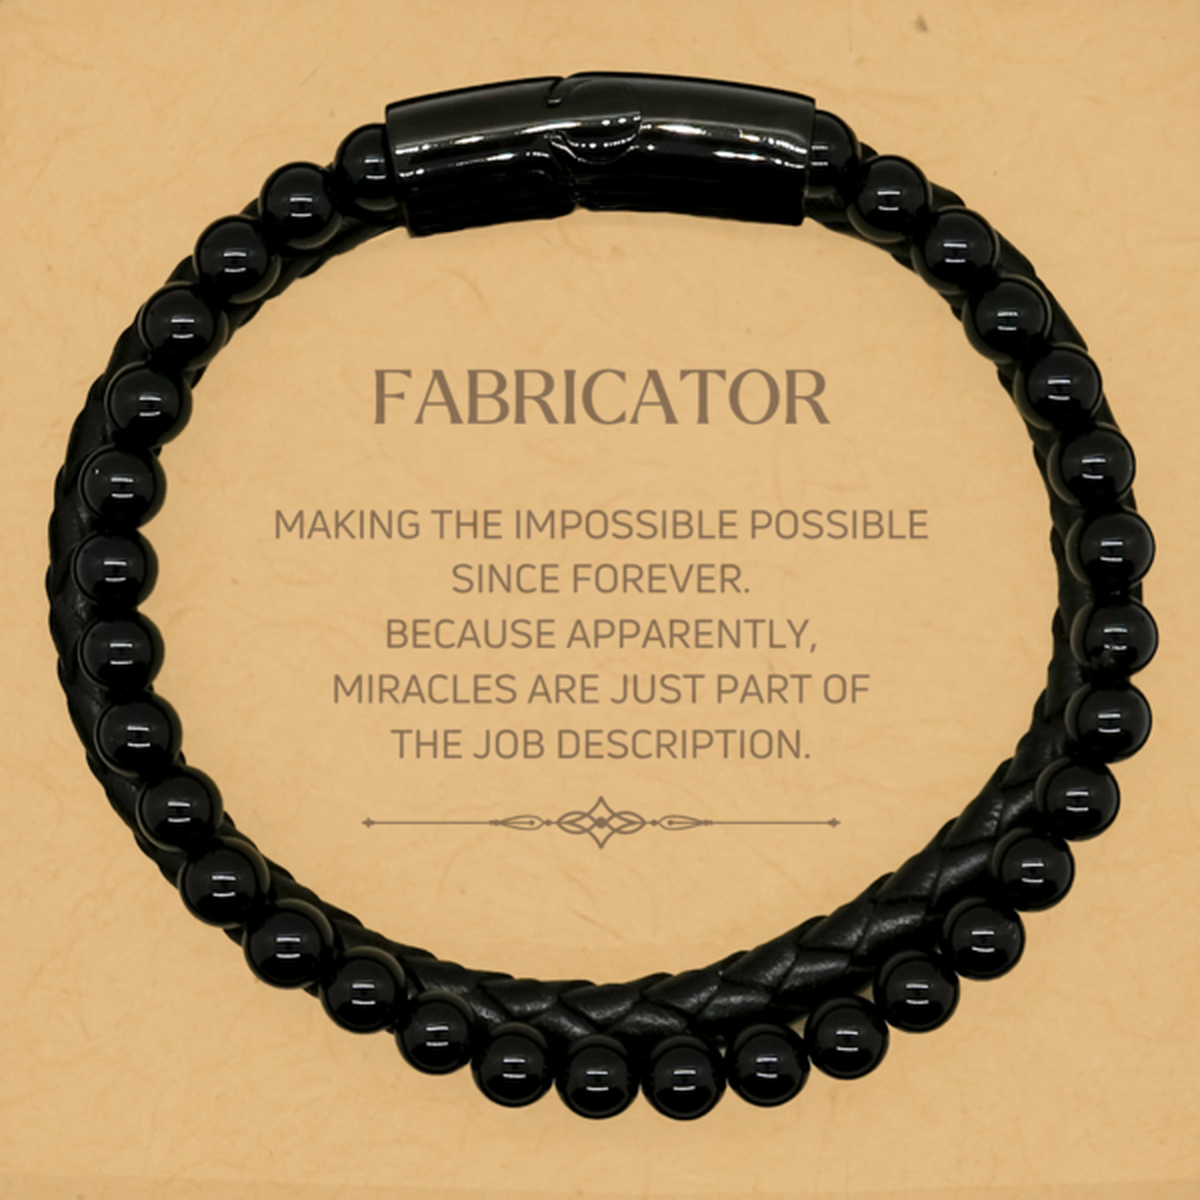 Funny Fabricator Gifts, Miracles are just part of the job description, Inspirational Birthday Stone Leather Bracelets For Fabricator, Men, Women, Coworkers, Friends, Boss